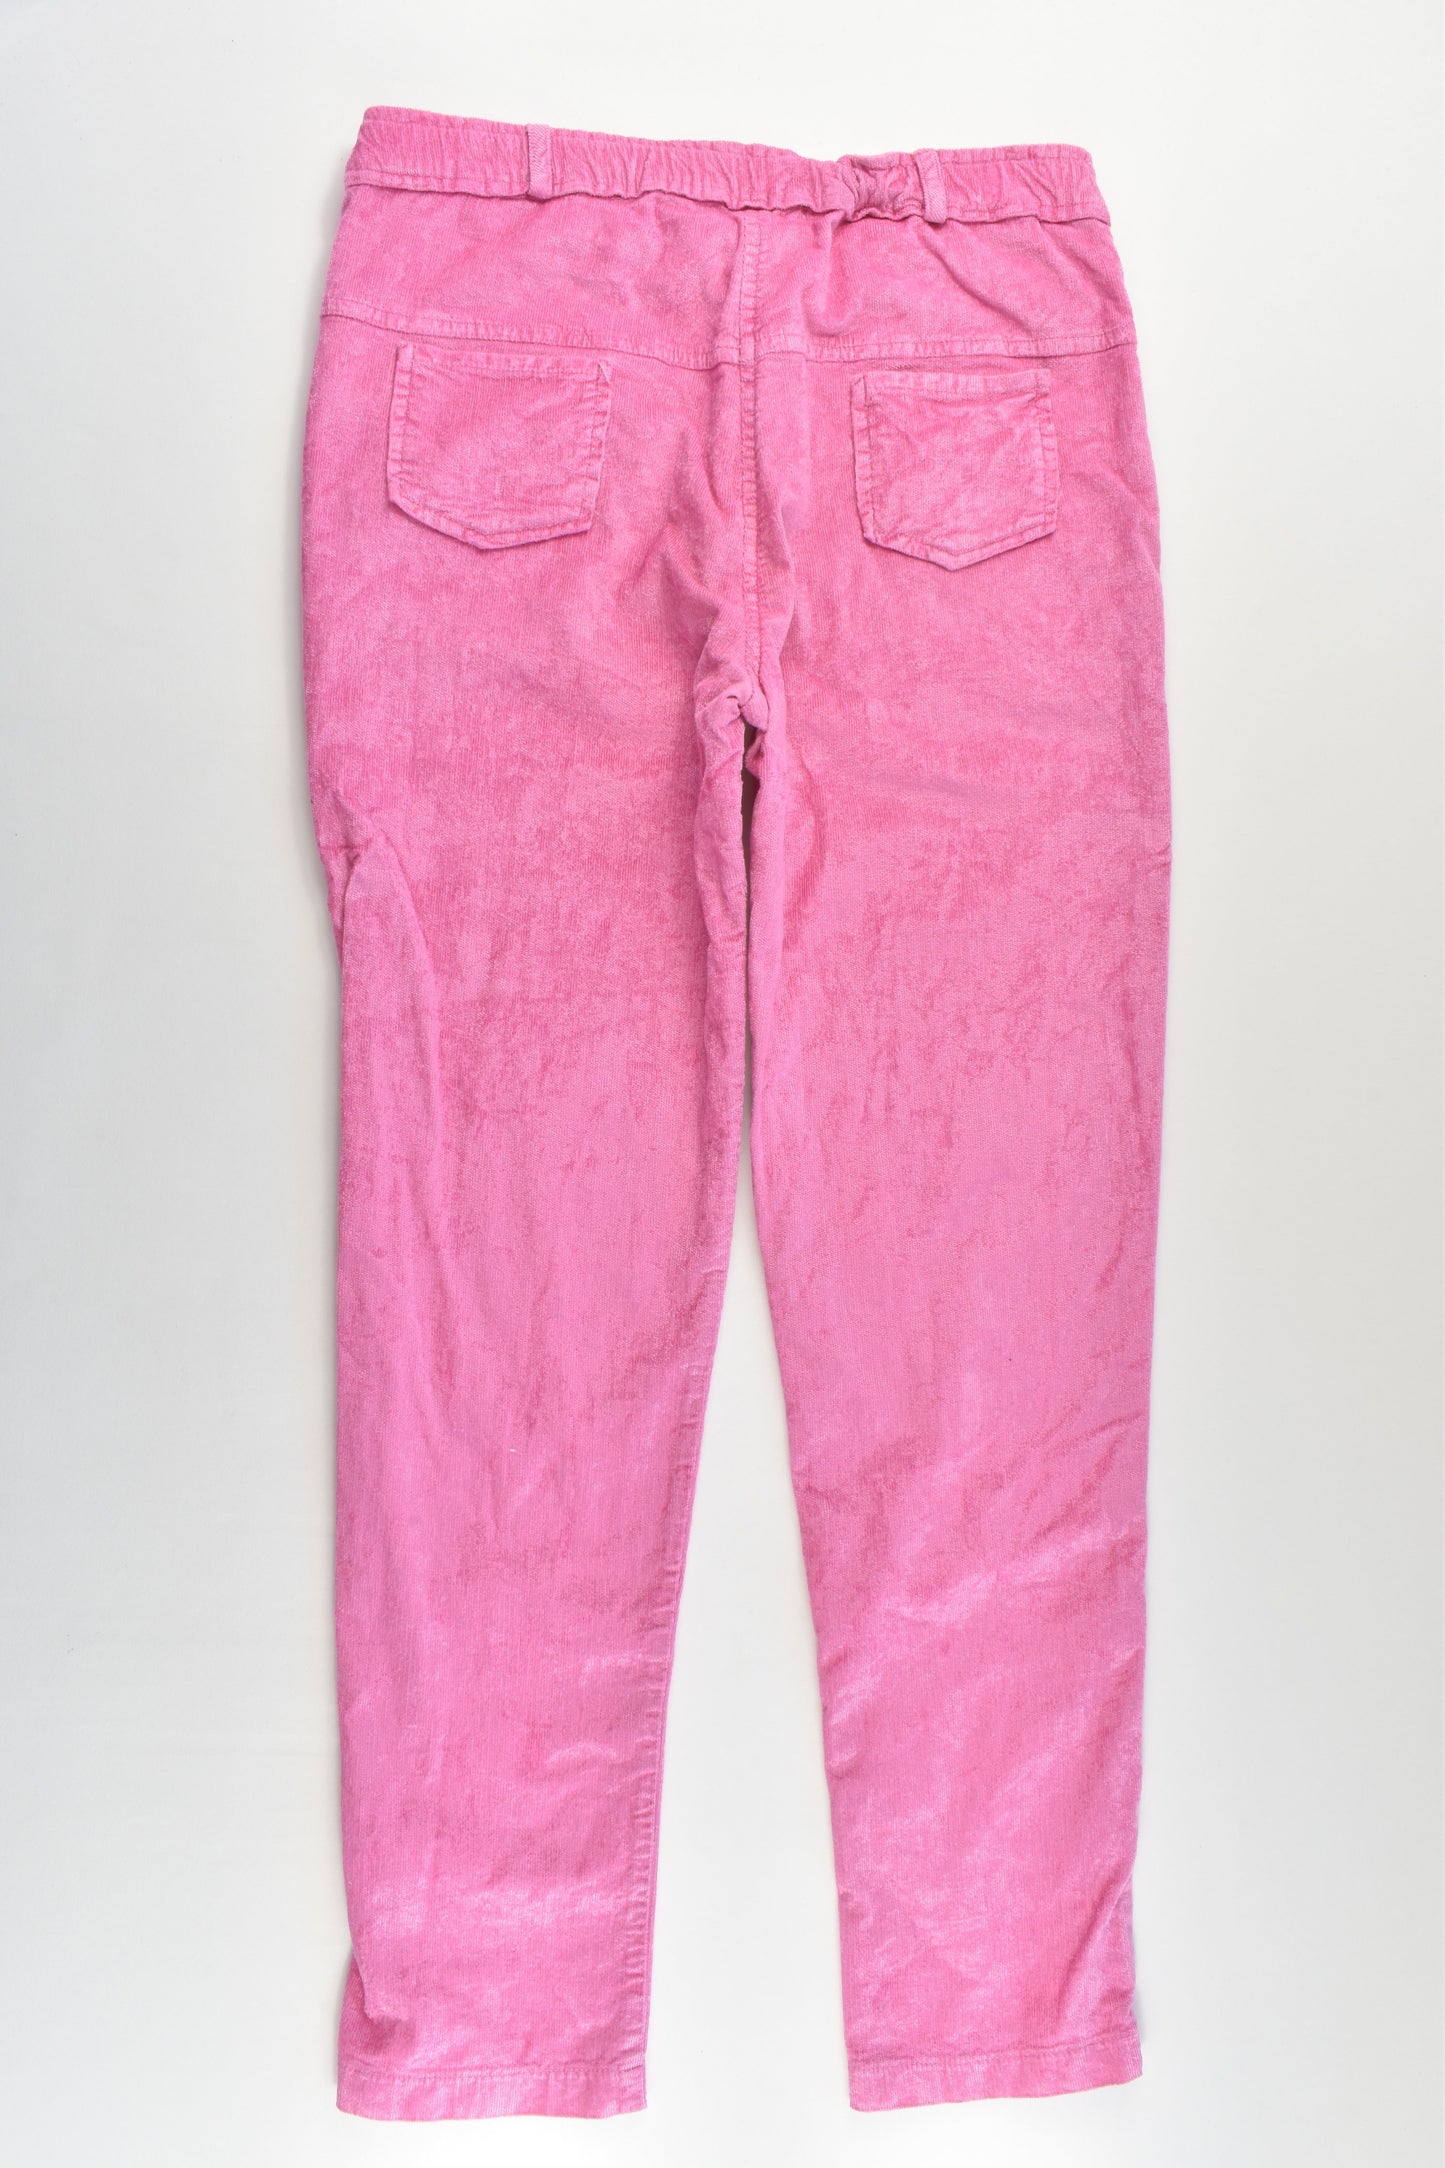 Peppermint Size 11-12 Rosy Shine Stretchy Pants